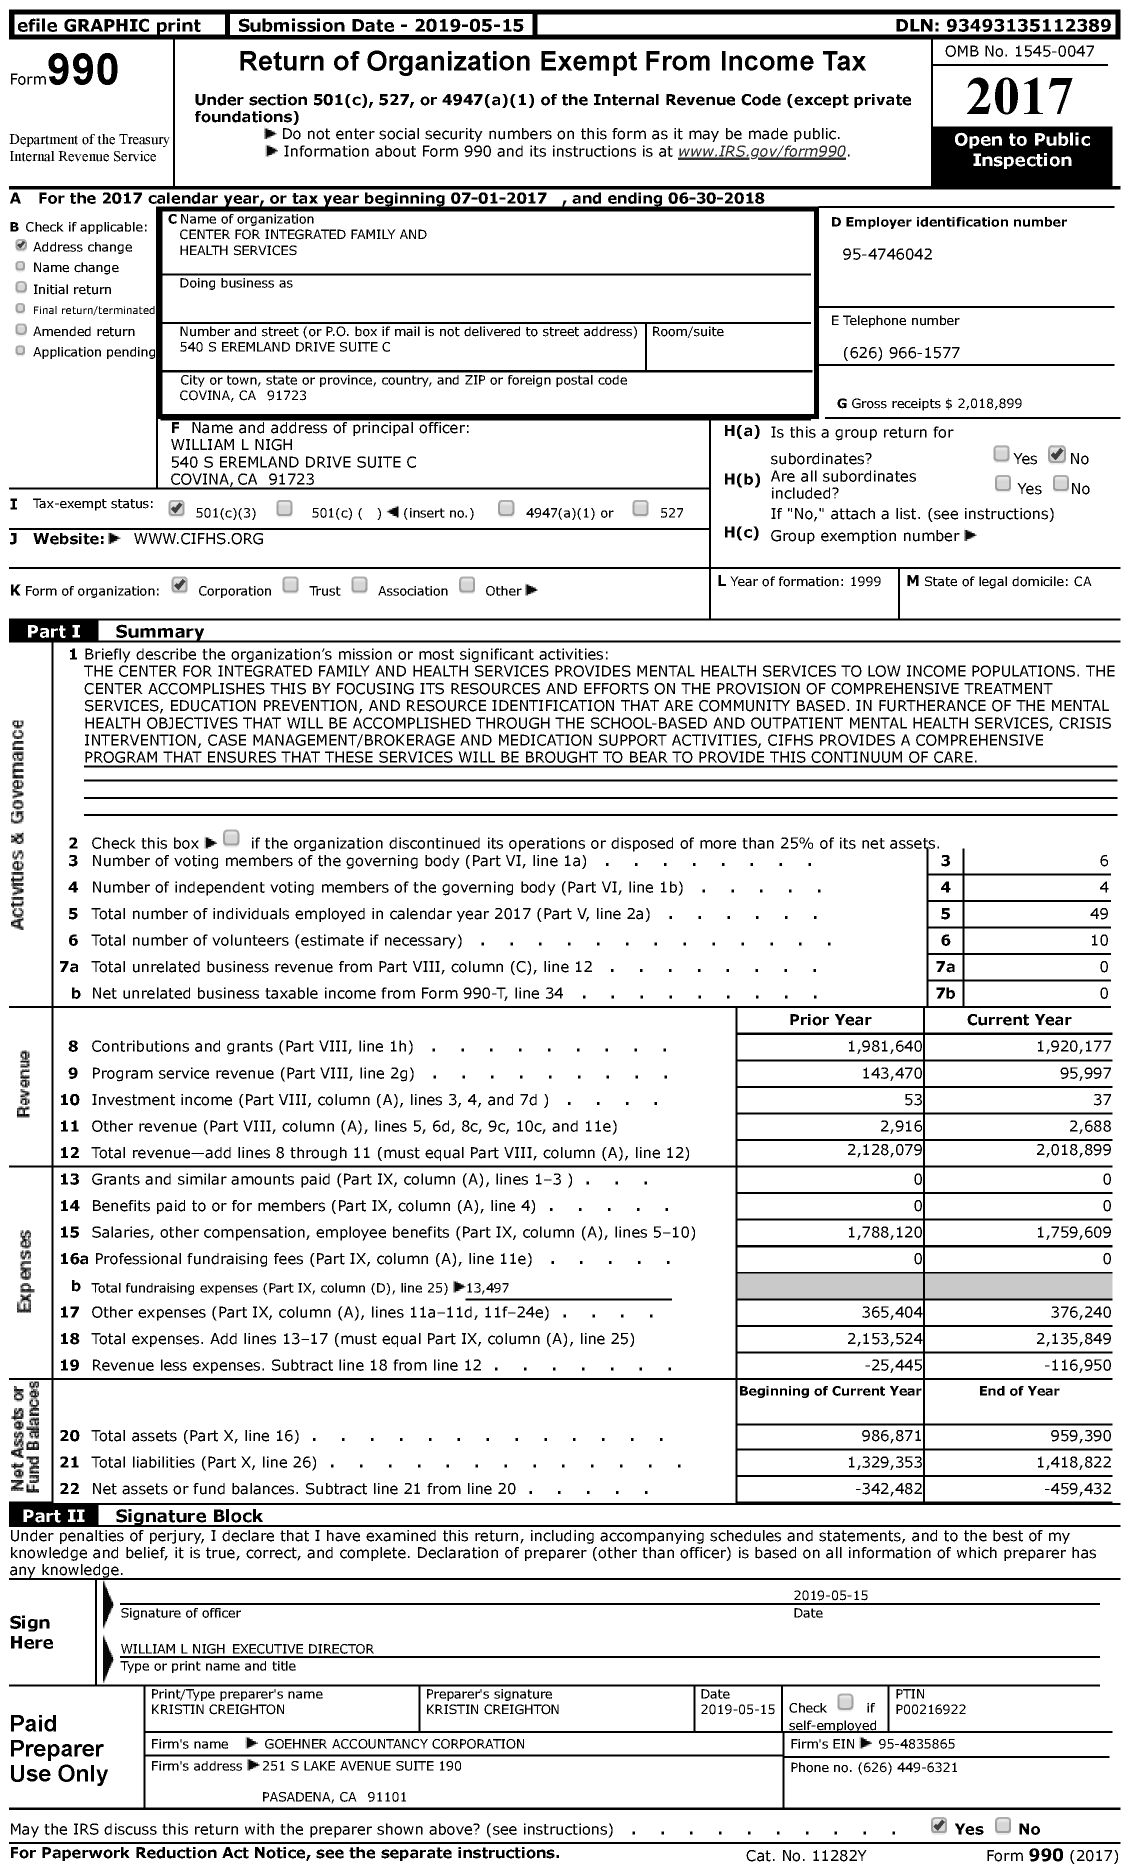 Image of first page of 2017 Form 990 for Center for Integrated Family and Health Services (CIFHS)